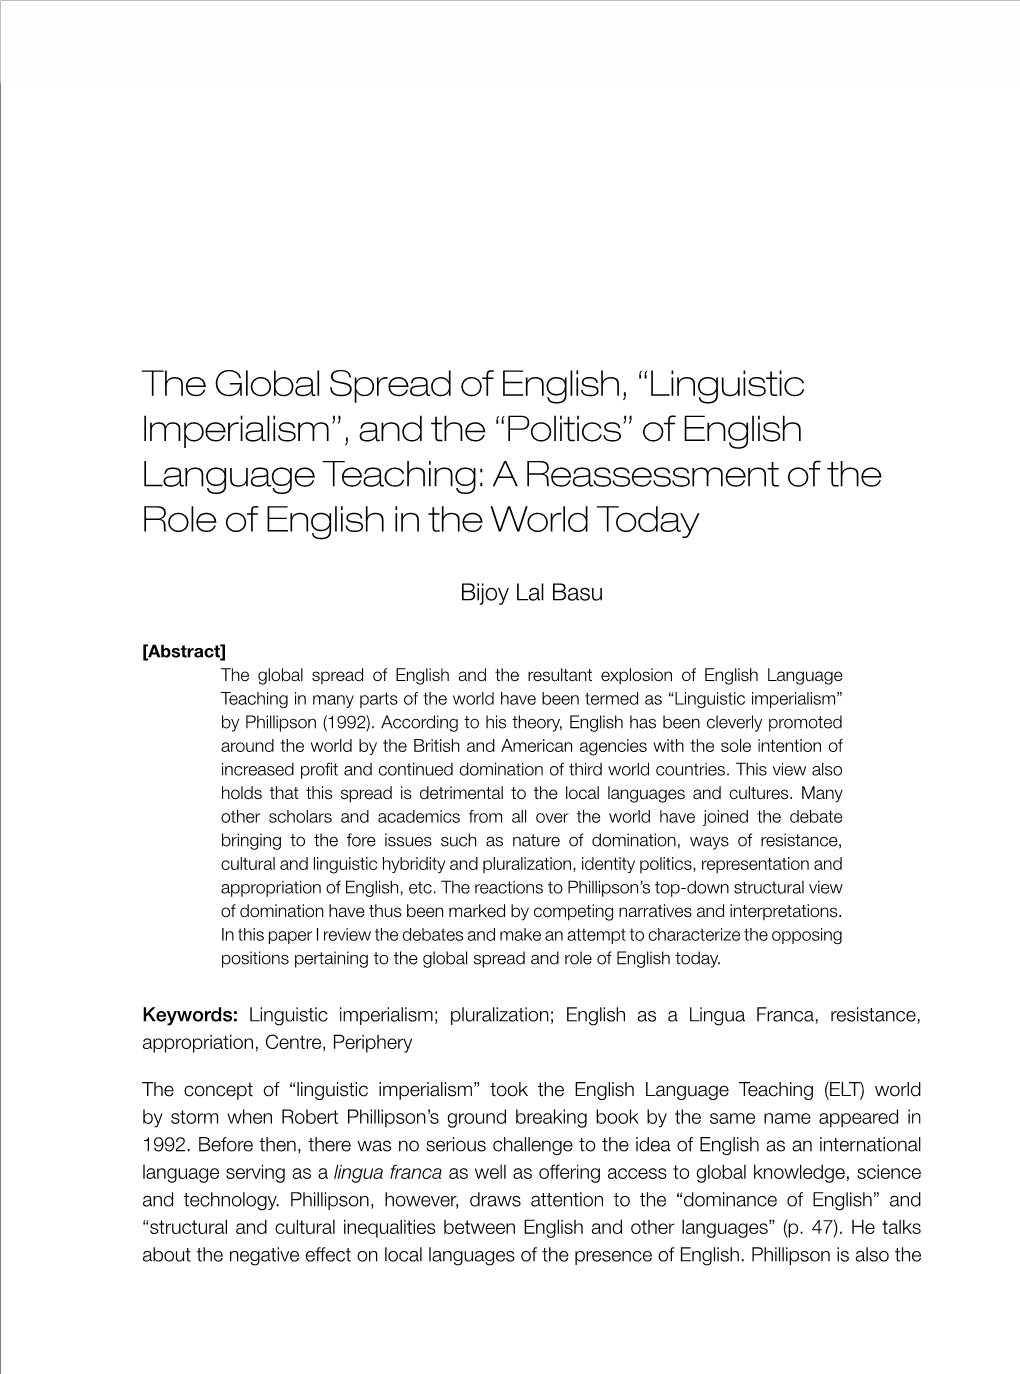 Linguistic Imperialism”, and the “Politics” of English Language Teaching: a Reassessment of the Role of English in the World Today